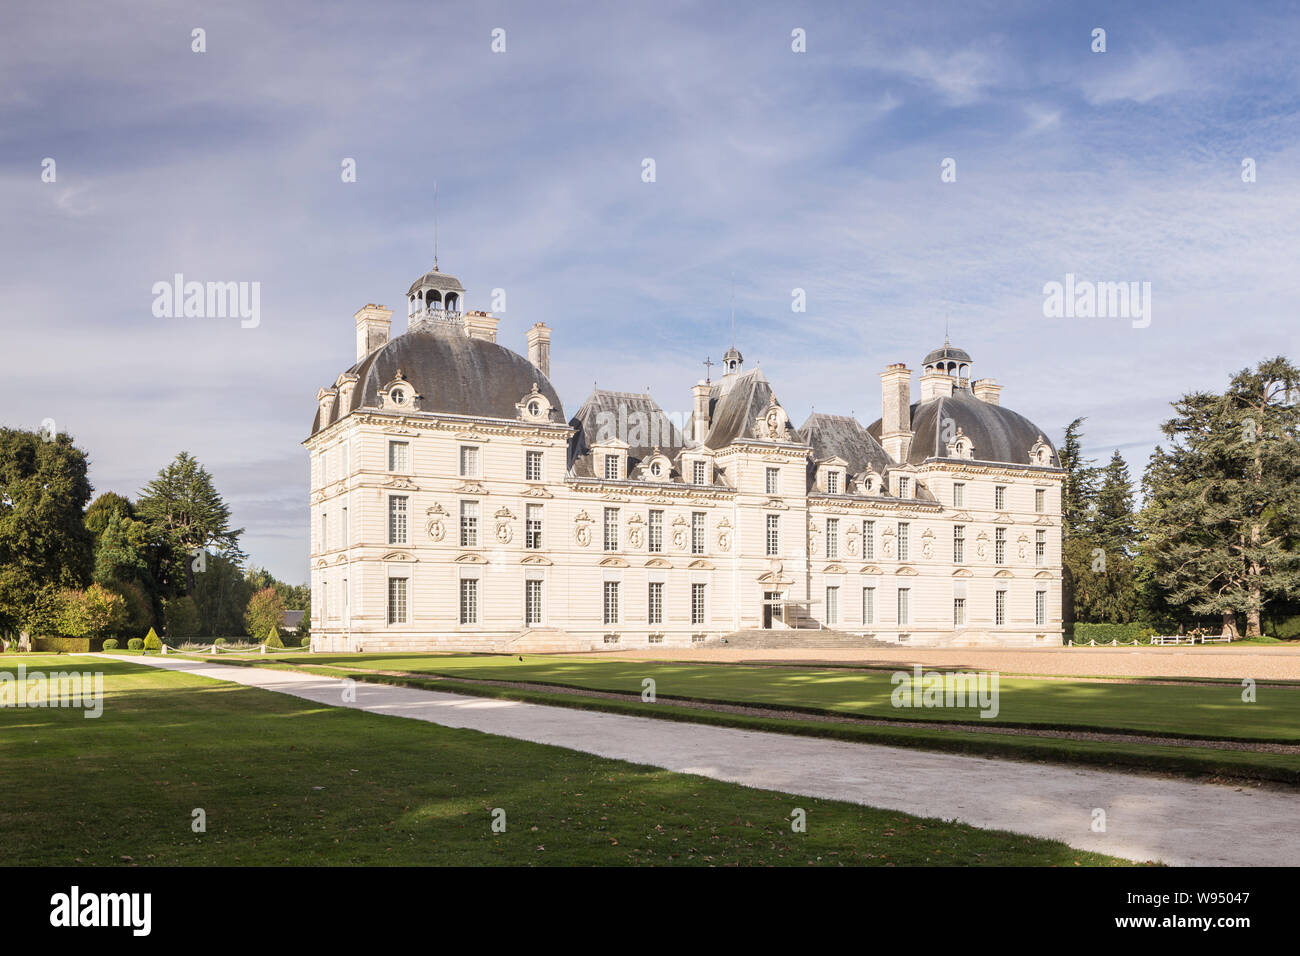 Chateau de Cheverny in the Loire Valley, France. Part of the Chateaux de la Loire, Chateau de Cheverny dates from the early 17th century. The design o Stock Photo